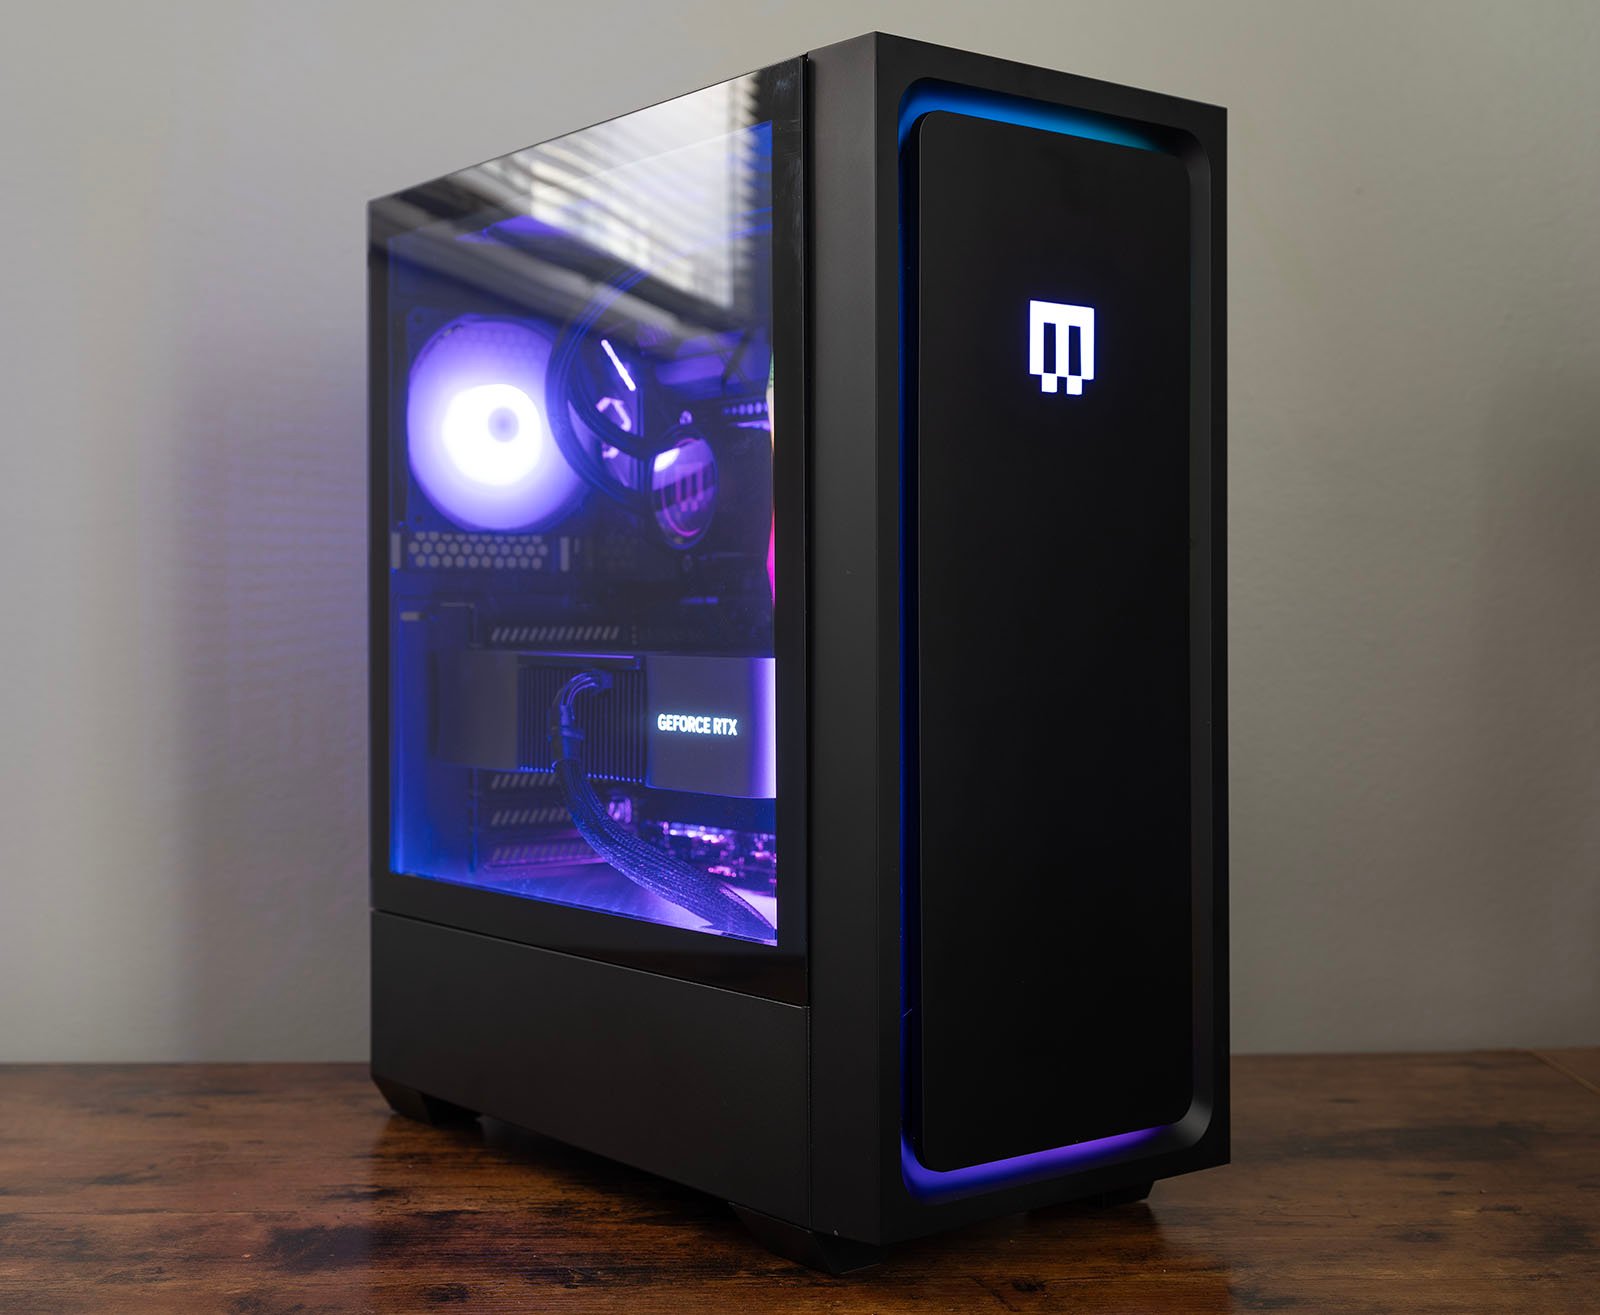 A sleek, black gaming PC tower with a side glass panel is shown on a wooden surface. The interior is illuminated with blue and purple LED lights, showcasing the components, including a GeForce RTX graphics card. The front panel features a glowing logo.